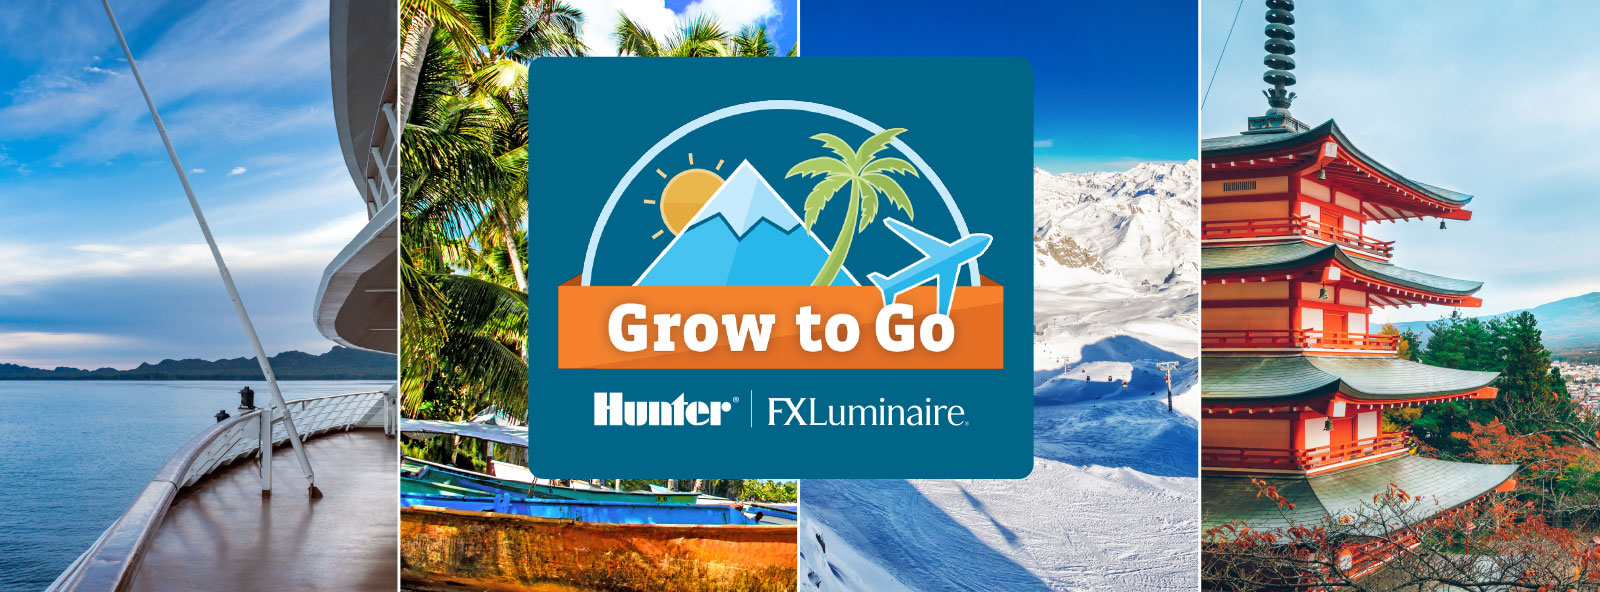 Grow to Go with Hunter Industries and FX Luminaire